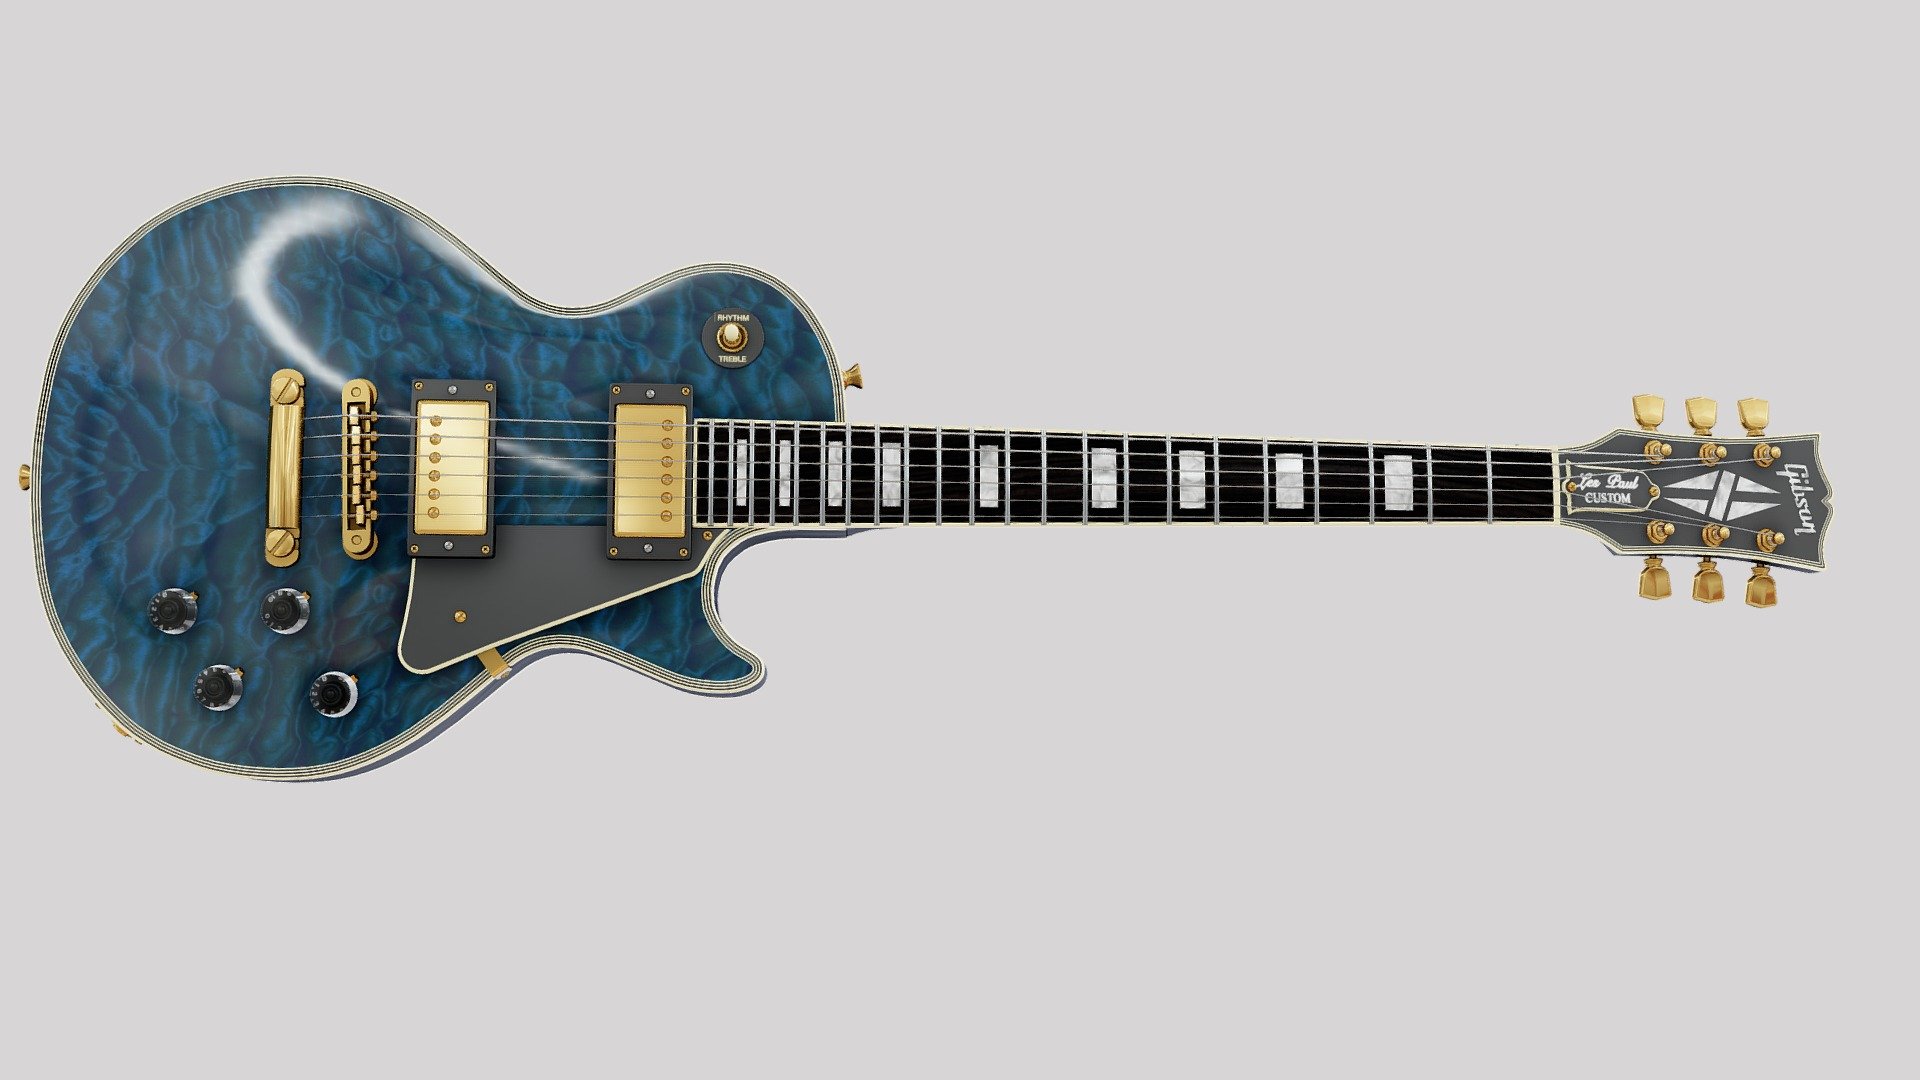 Beautiful Gibson Les Paul Custom
Guilted Maple top
Blue Coating Finish
Gold Furnitire
Body and heanstock Multi-ply binding

Model is created for AR/VR realtime use
4K textures - Gibson Les Paul Custom - Buy Royalty Free 3D model by Eugene Korolev (@eugene.korolev) 3d model